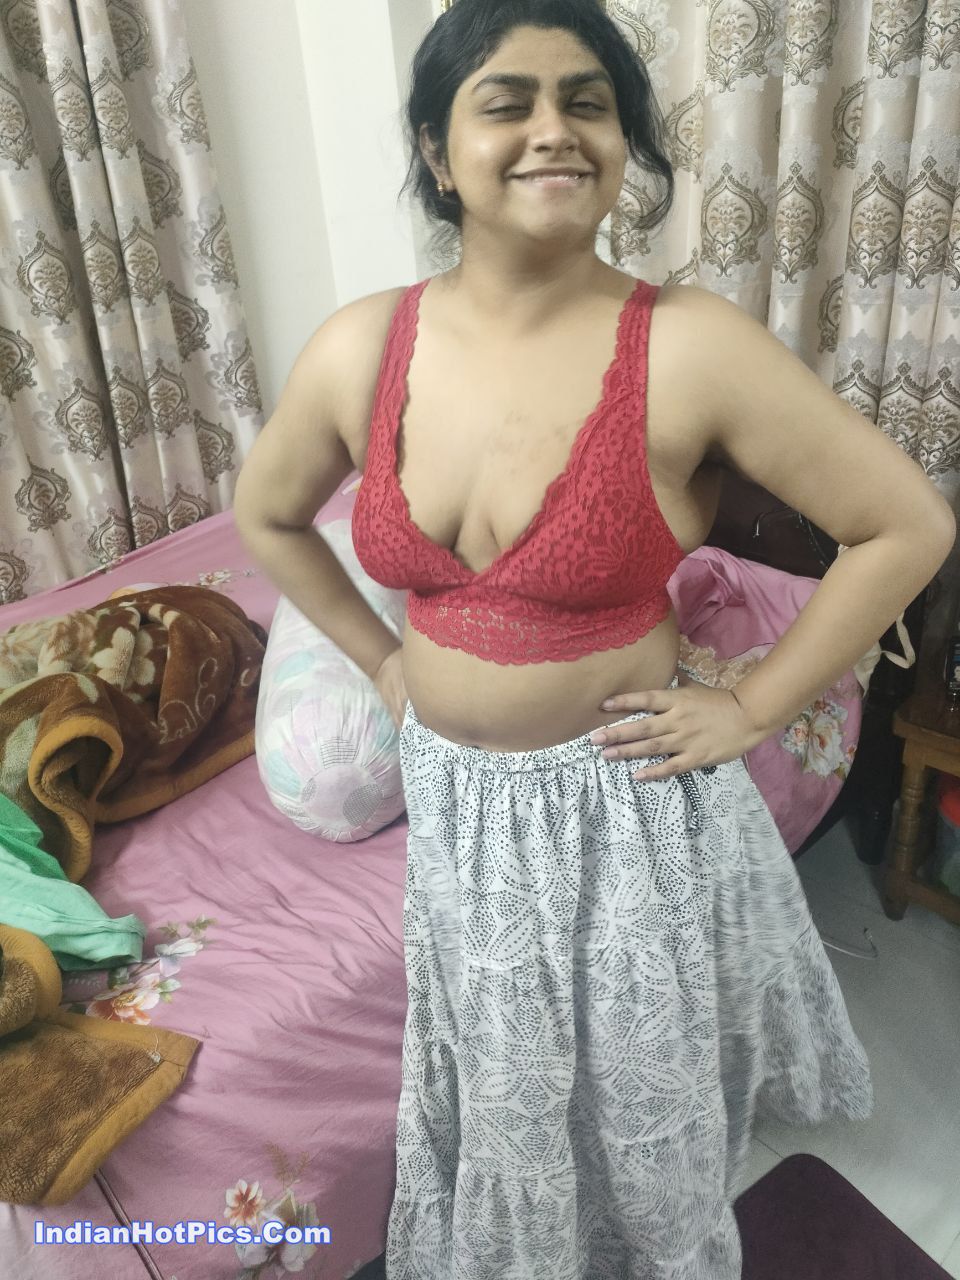 Indian Wife Nude And Sex Honeymoon Photos image picture